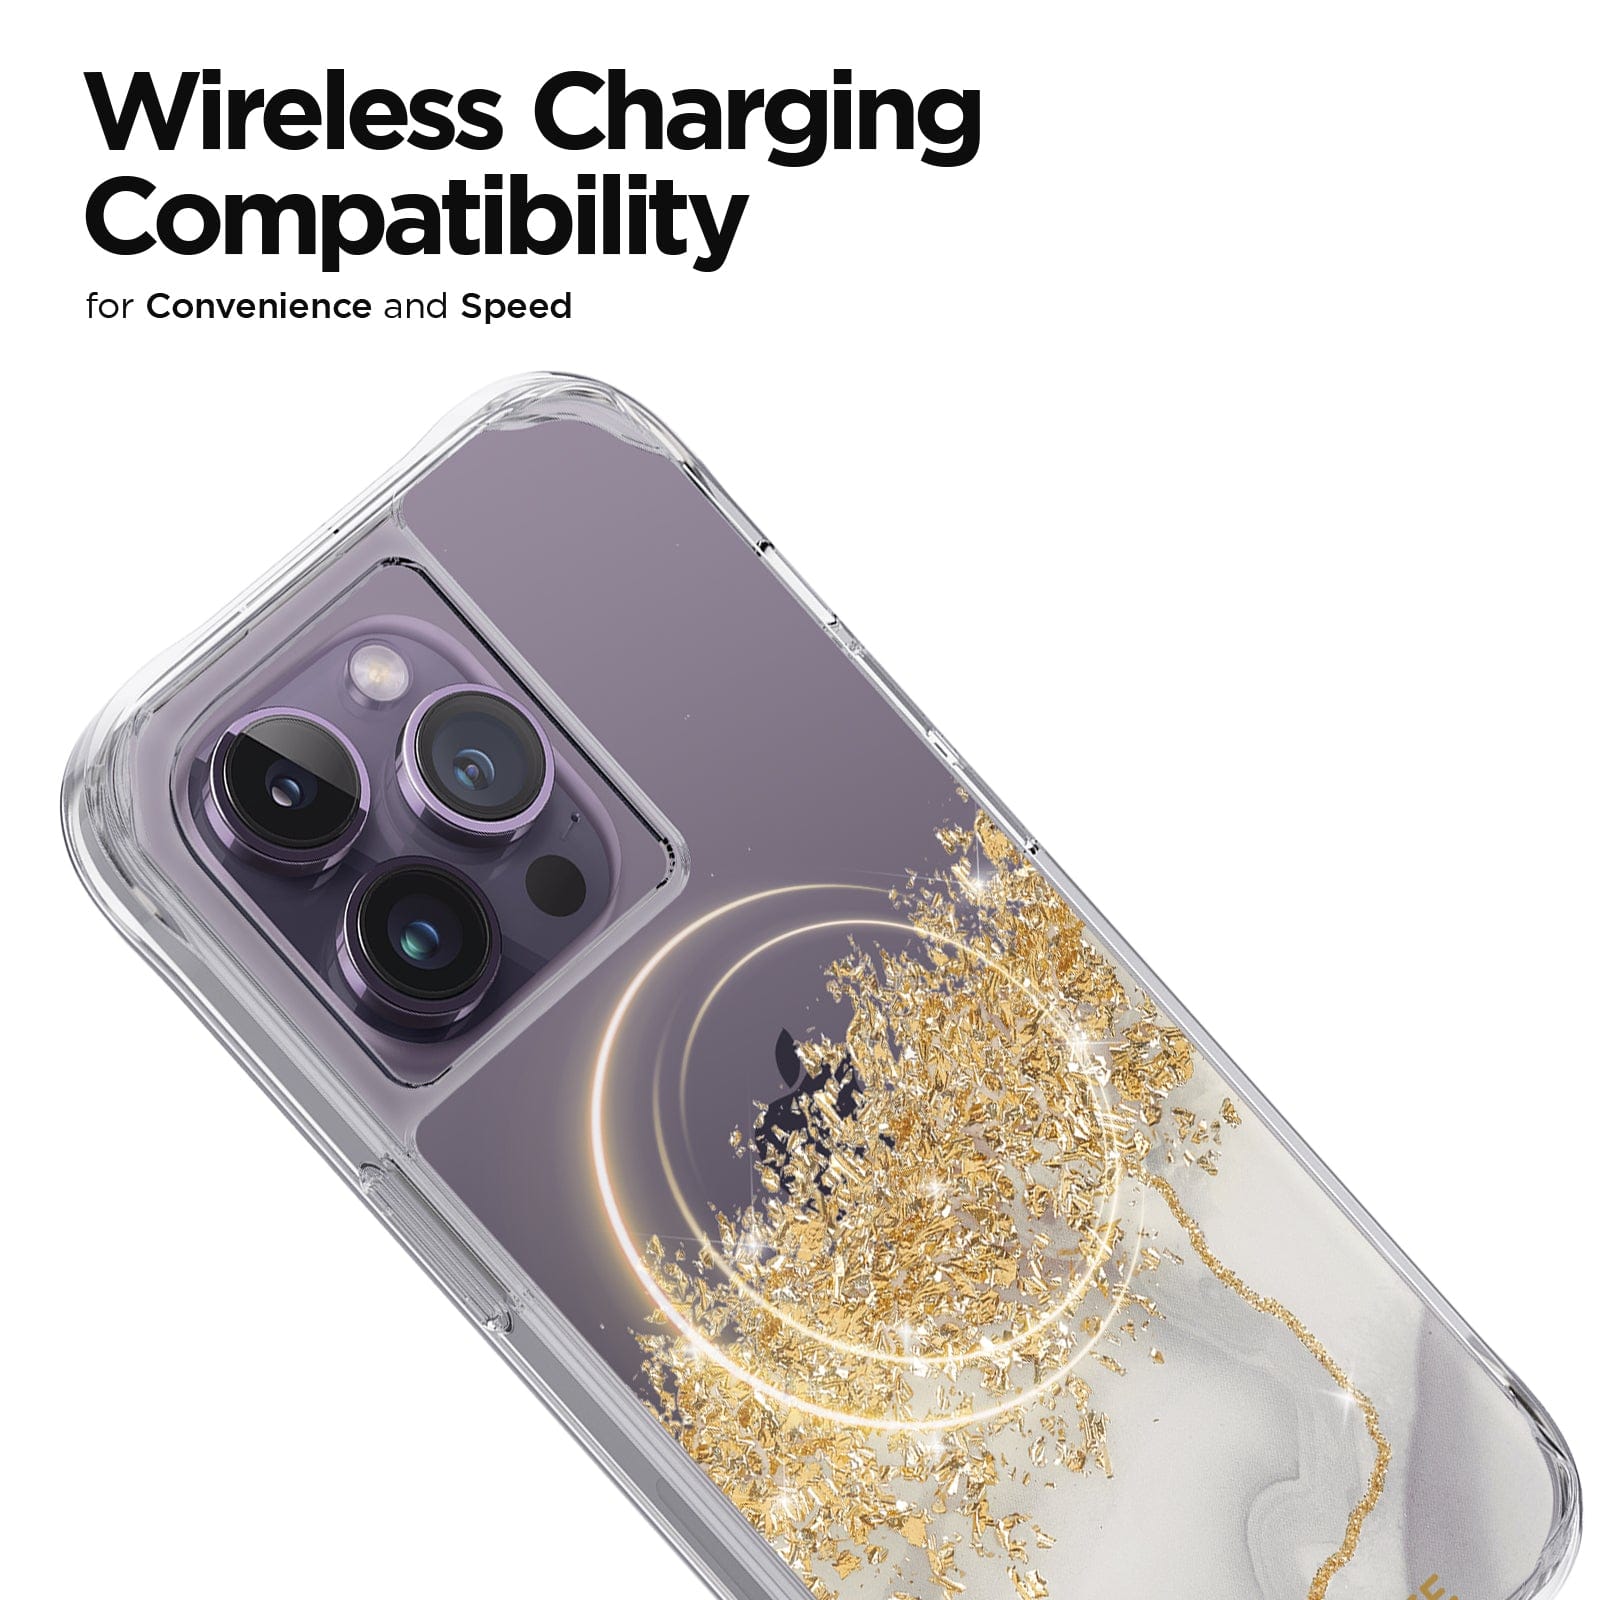 WIRELESS CHARGING COMPATIBILITY FOR CONVENIENCE AND SPEED.